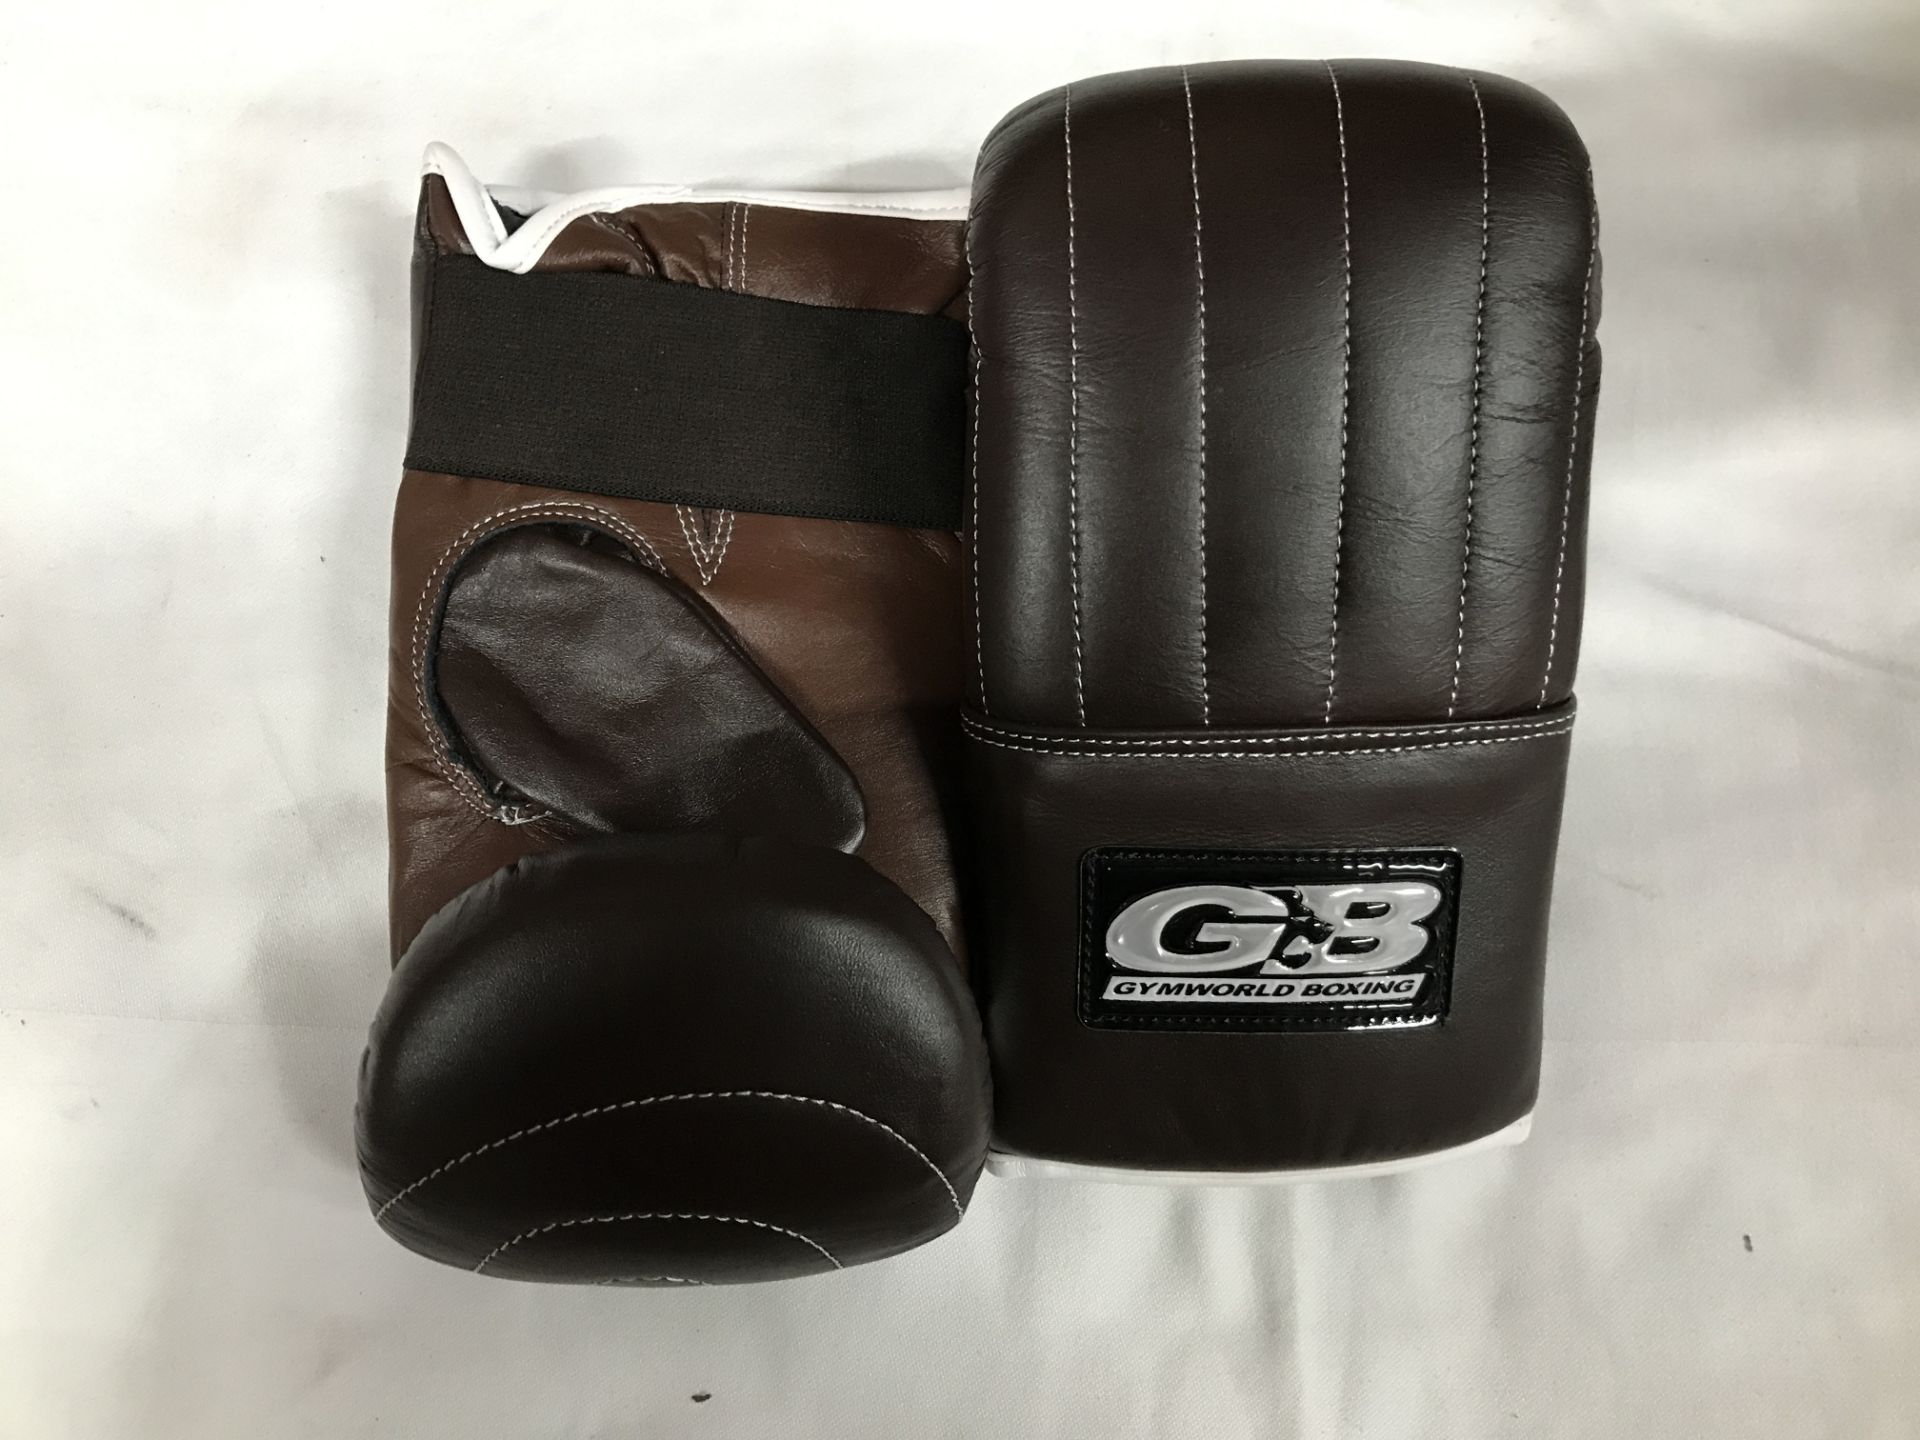 28 x Pairs of Brown Boxing Gloves - Sizes : M & L